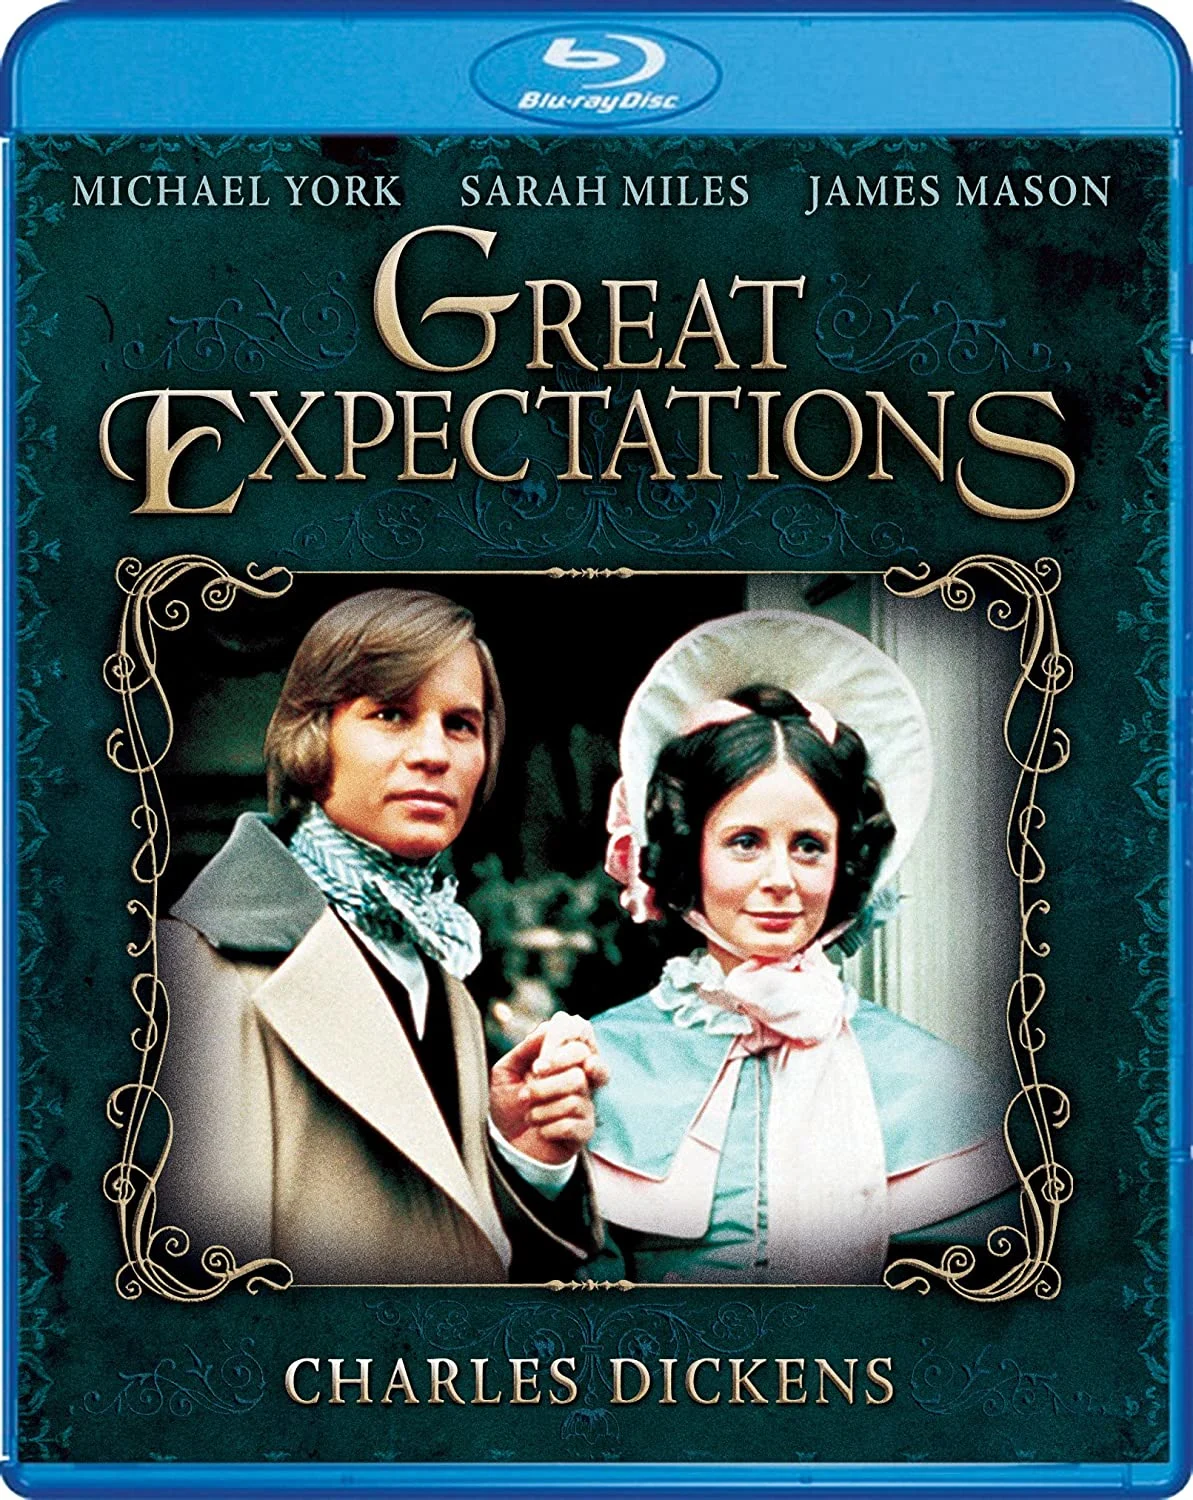 Great Expectations (Blu-ray) on MovieShack